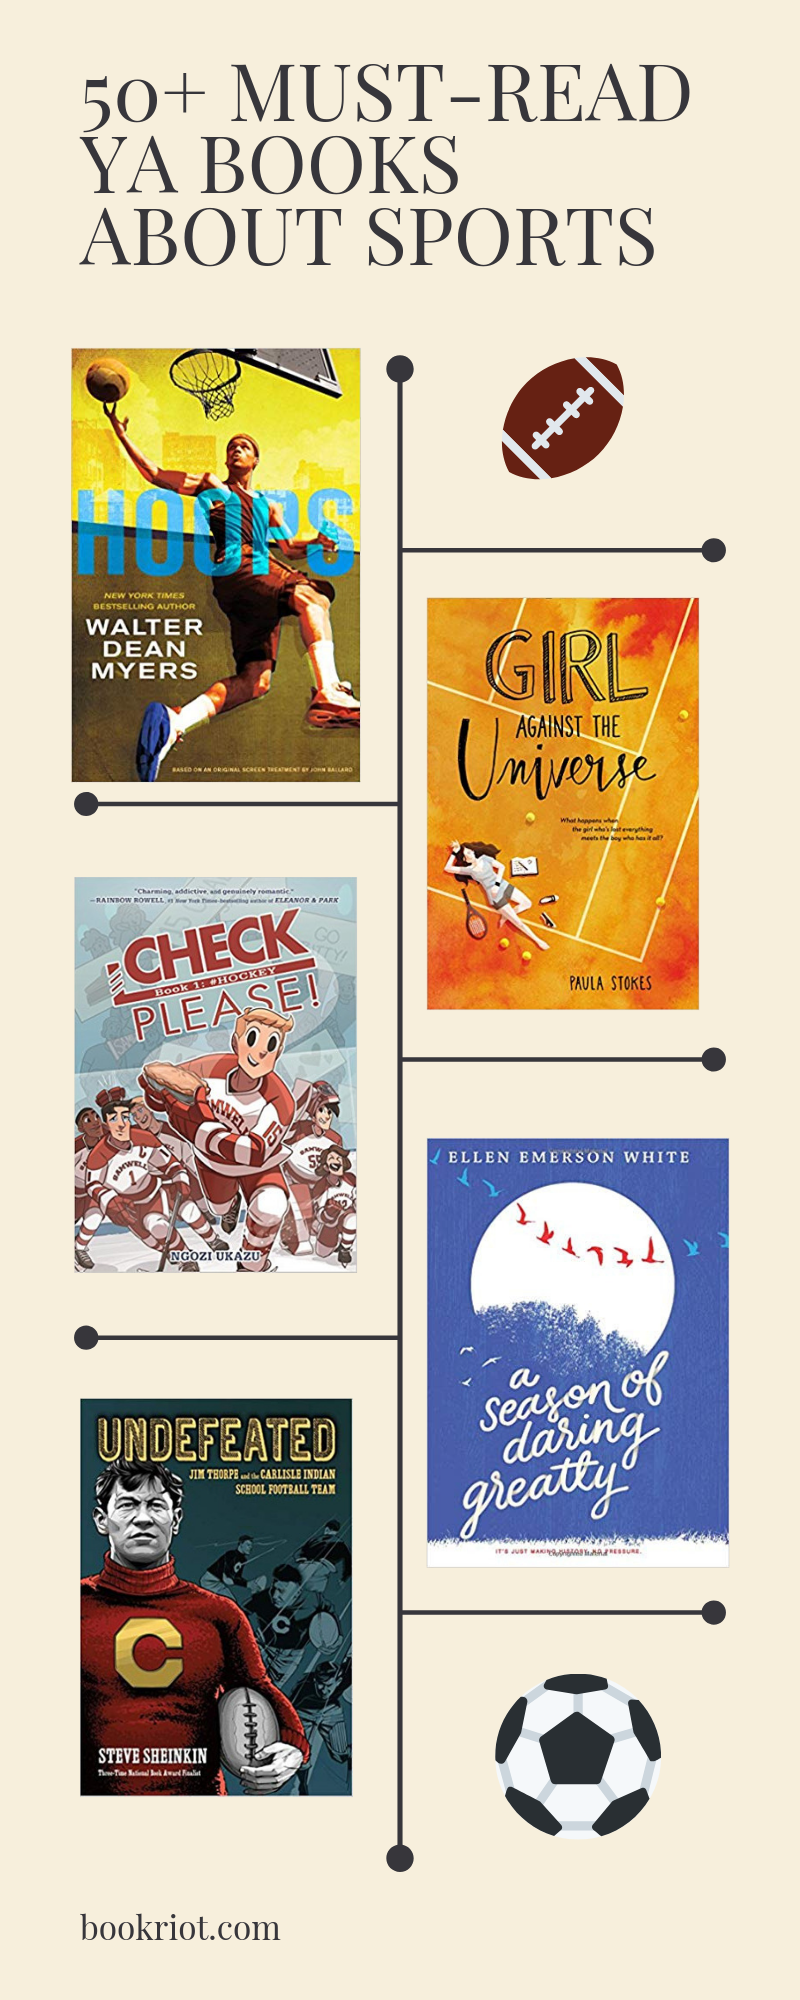 Over 50 outstanding YA books about sports for all types of readers and athletic enthusiasts. book lists | YA books | YA books about sports | YA sports books | Young Adult books | sports books | sports fiction | sports nonfiction | nonfiction books | #YALit 